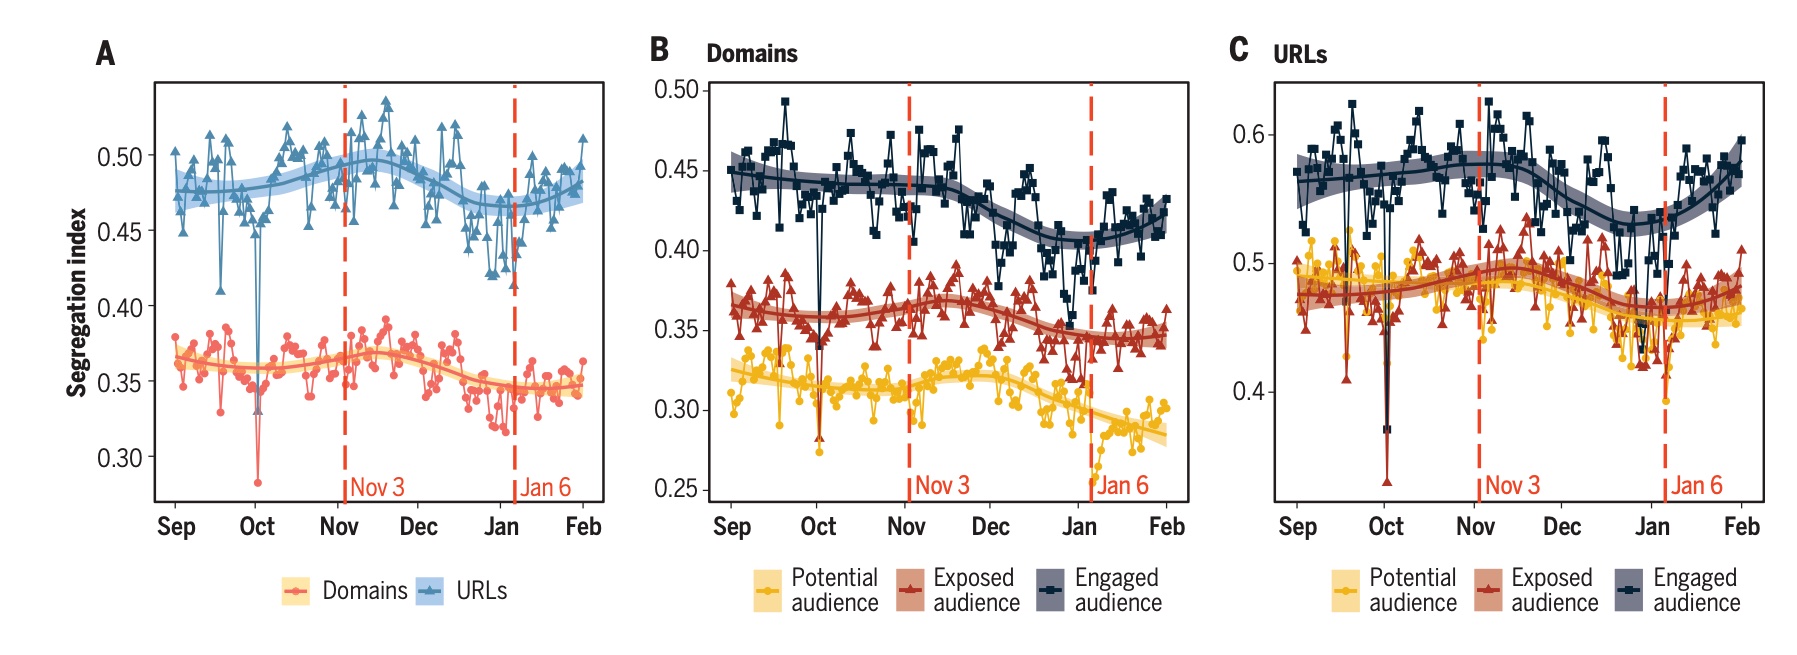 Figure 2 from González-Bailón et al 2023: There are much higher levels of audience segregation when you look at the URL level rather than the domain level